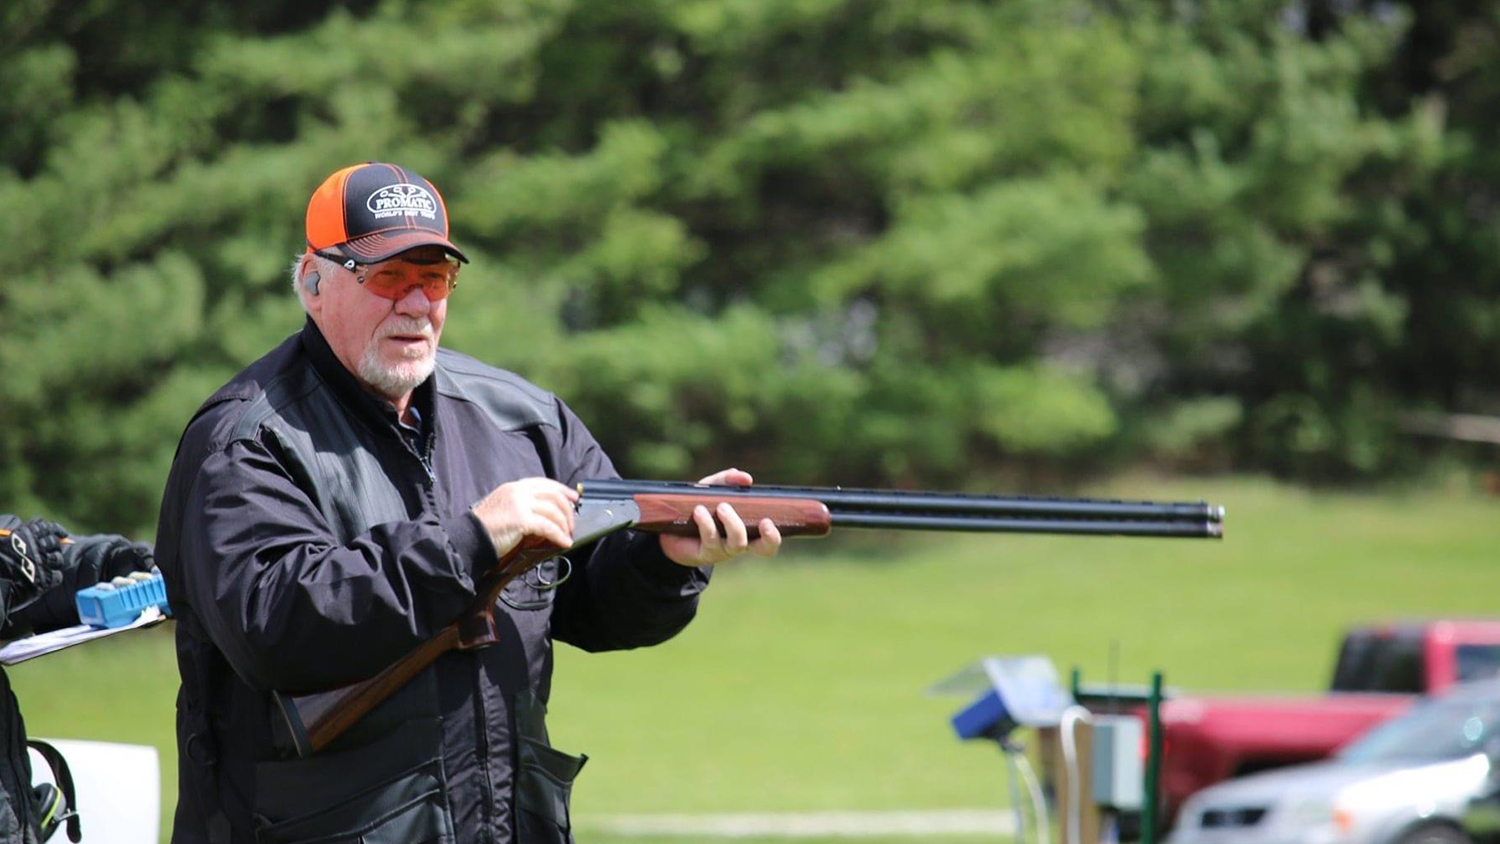 Building Relationships through the Shooting Sports